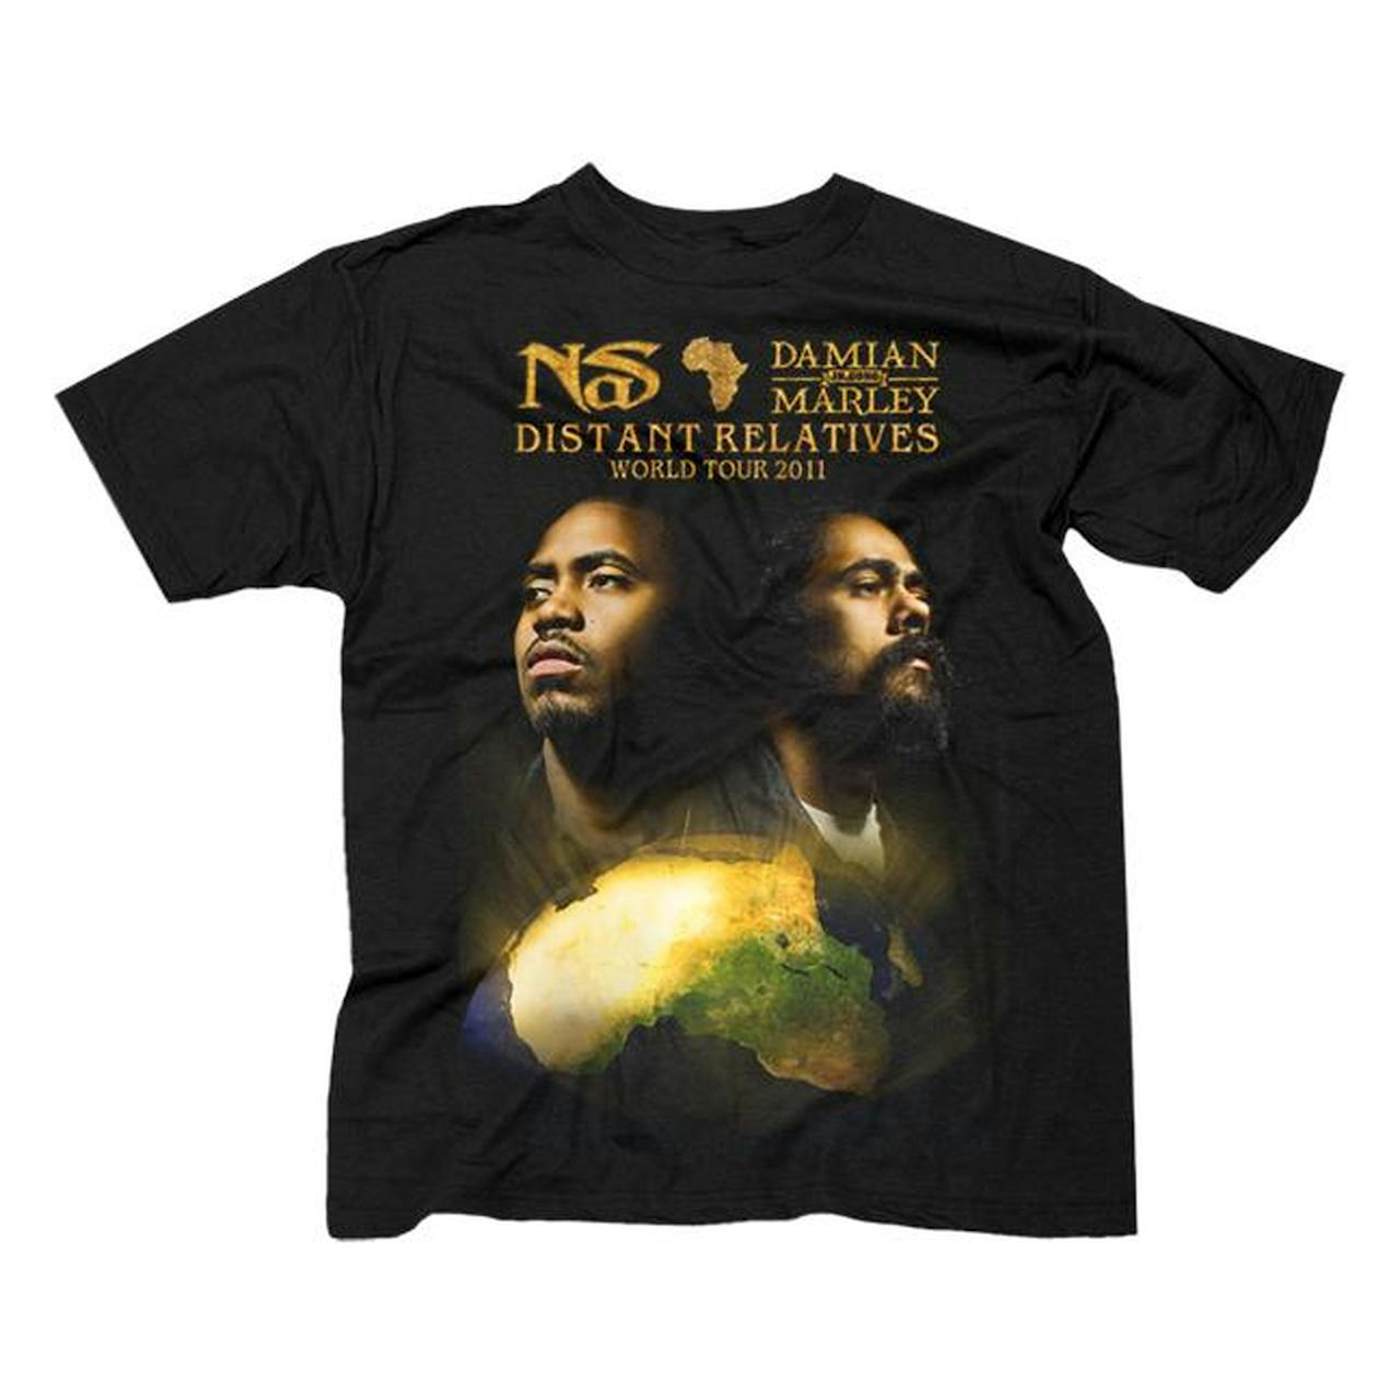 Damian Marley & Nas "Distant Relatives" T-Shirt